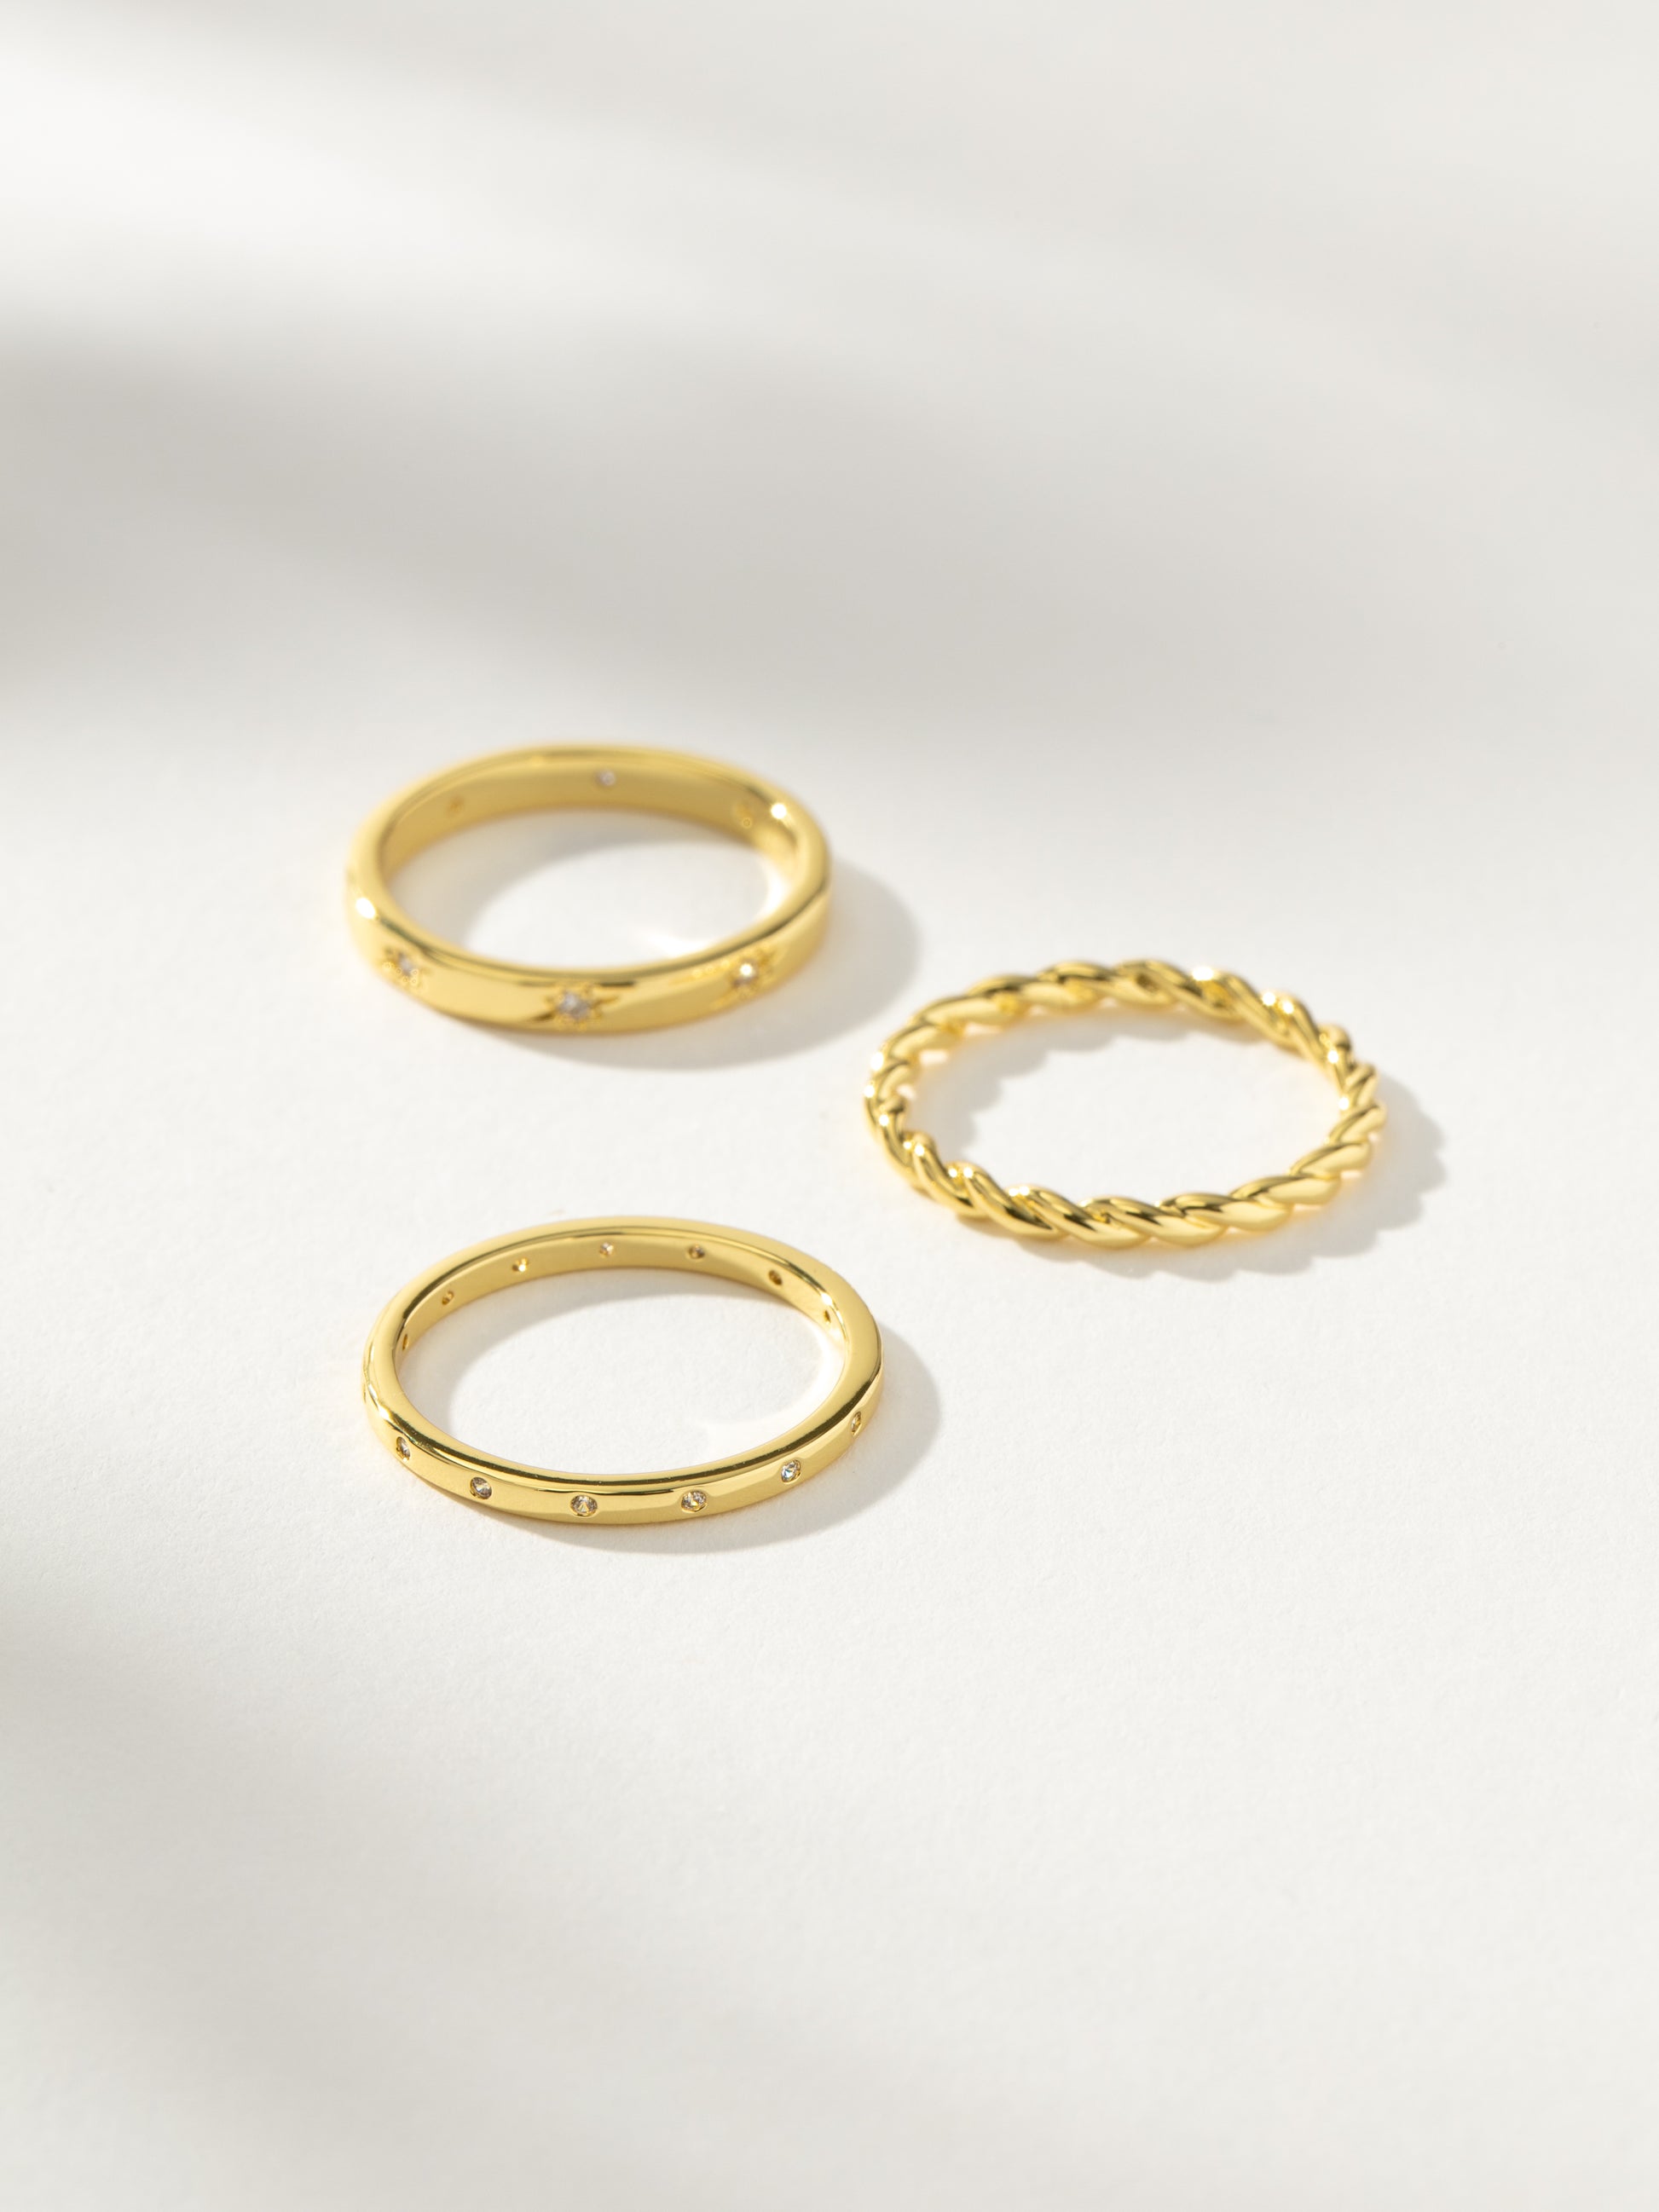 Triad Ring | Gold | Product Image | Uncommon James